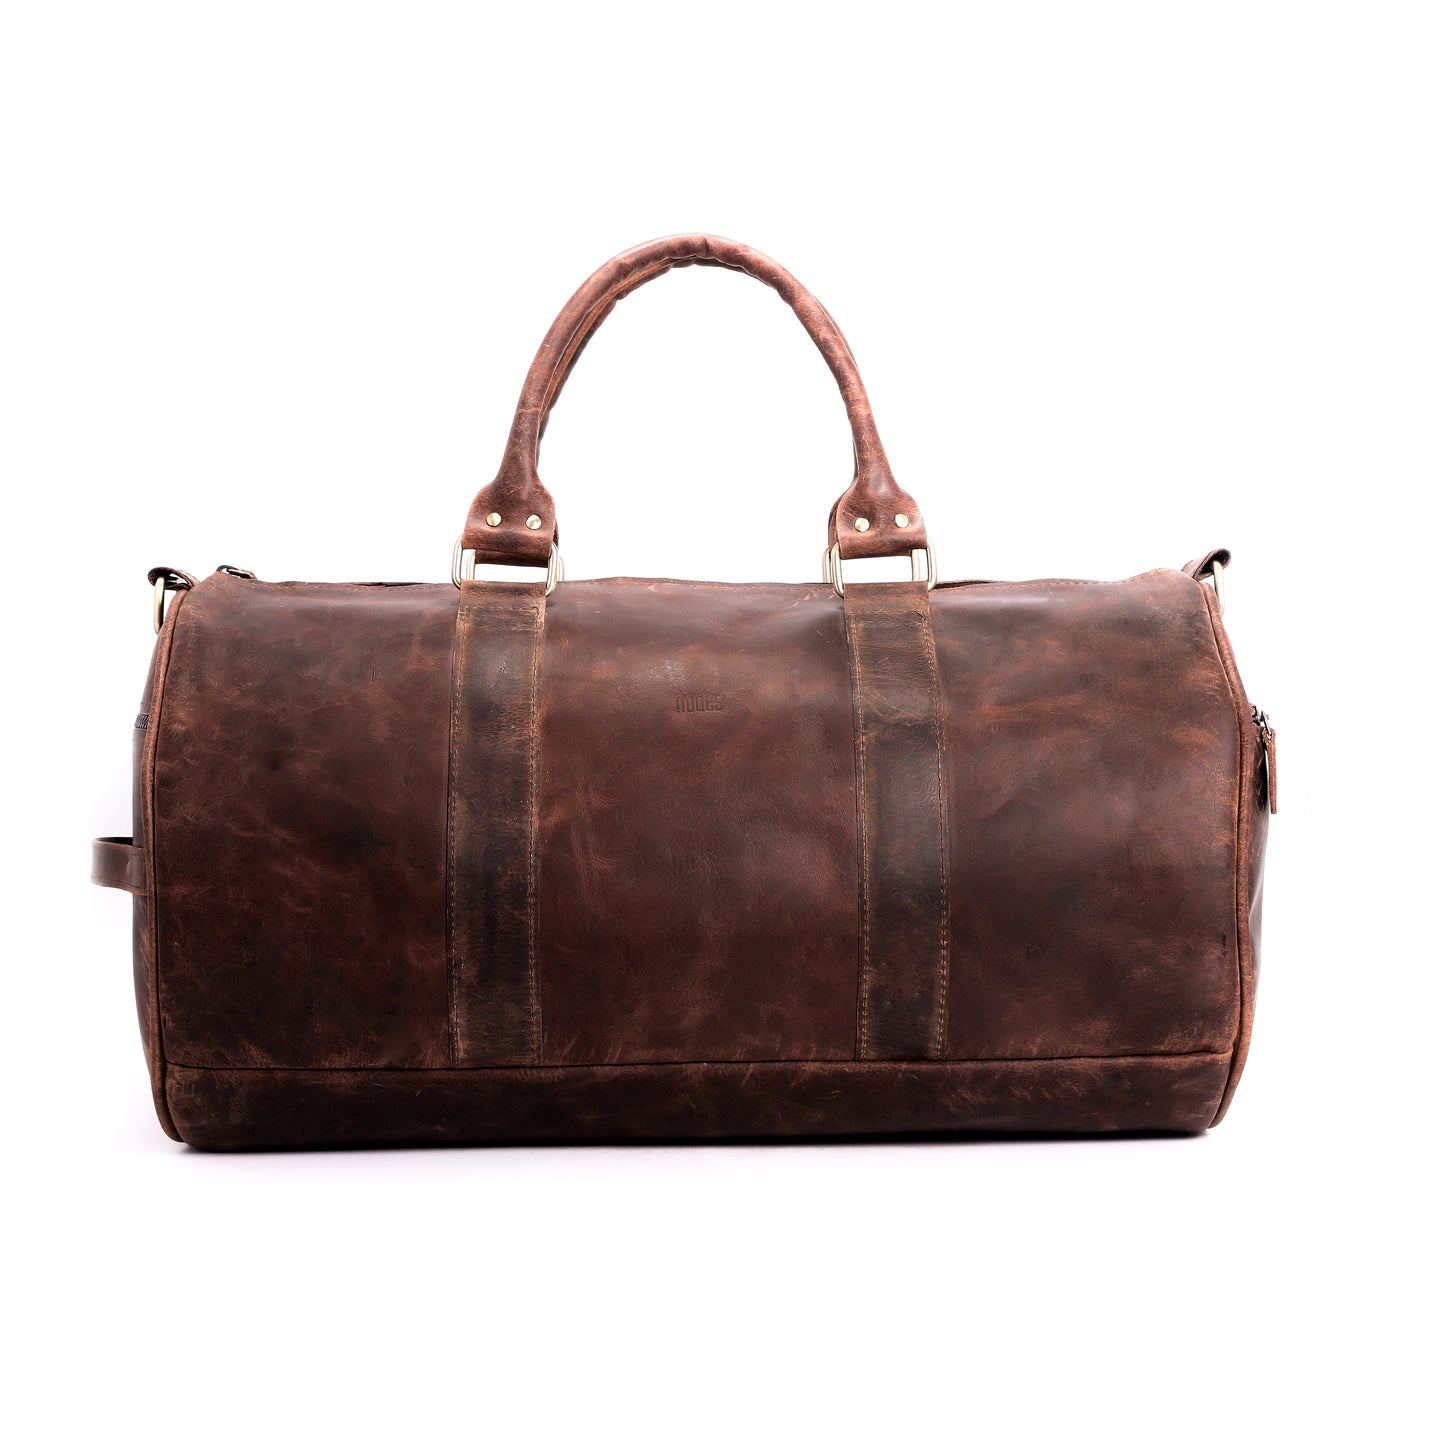 The Ranger - Cylindrical Leather Duffle Bag